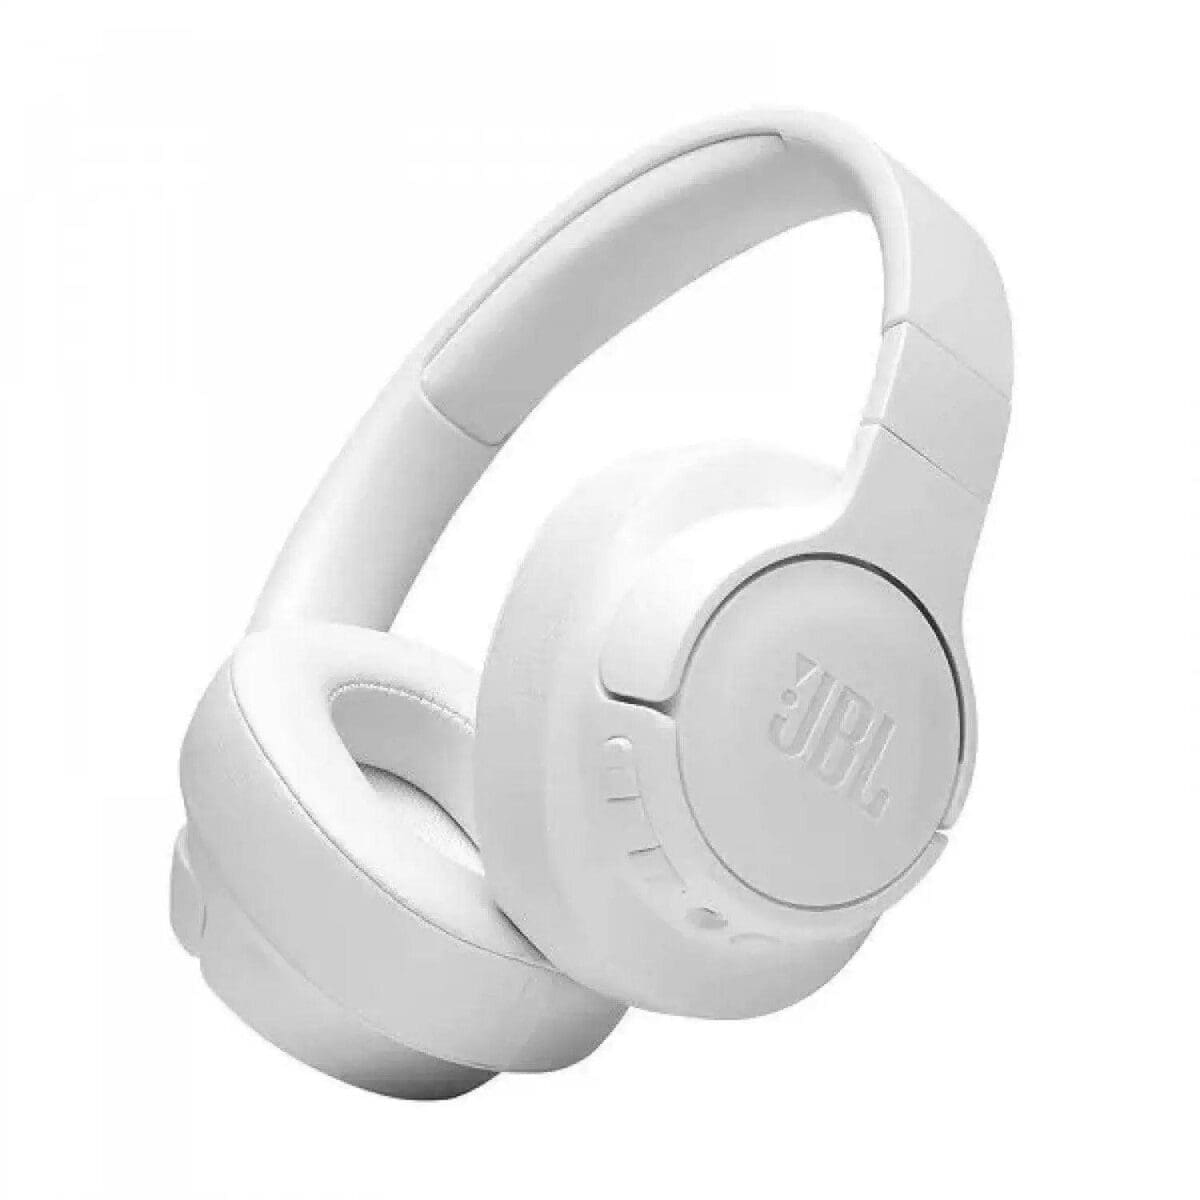 JBL TUNE 760BT Wireless Over-Ear Headphones with Noise Cancellation